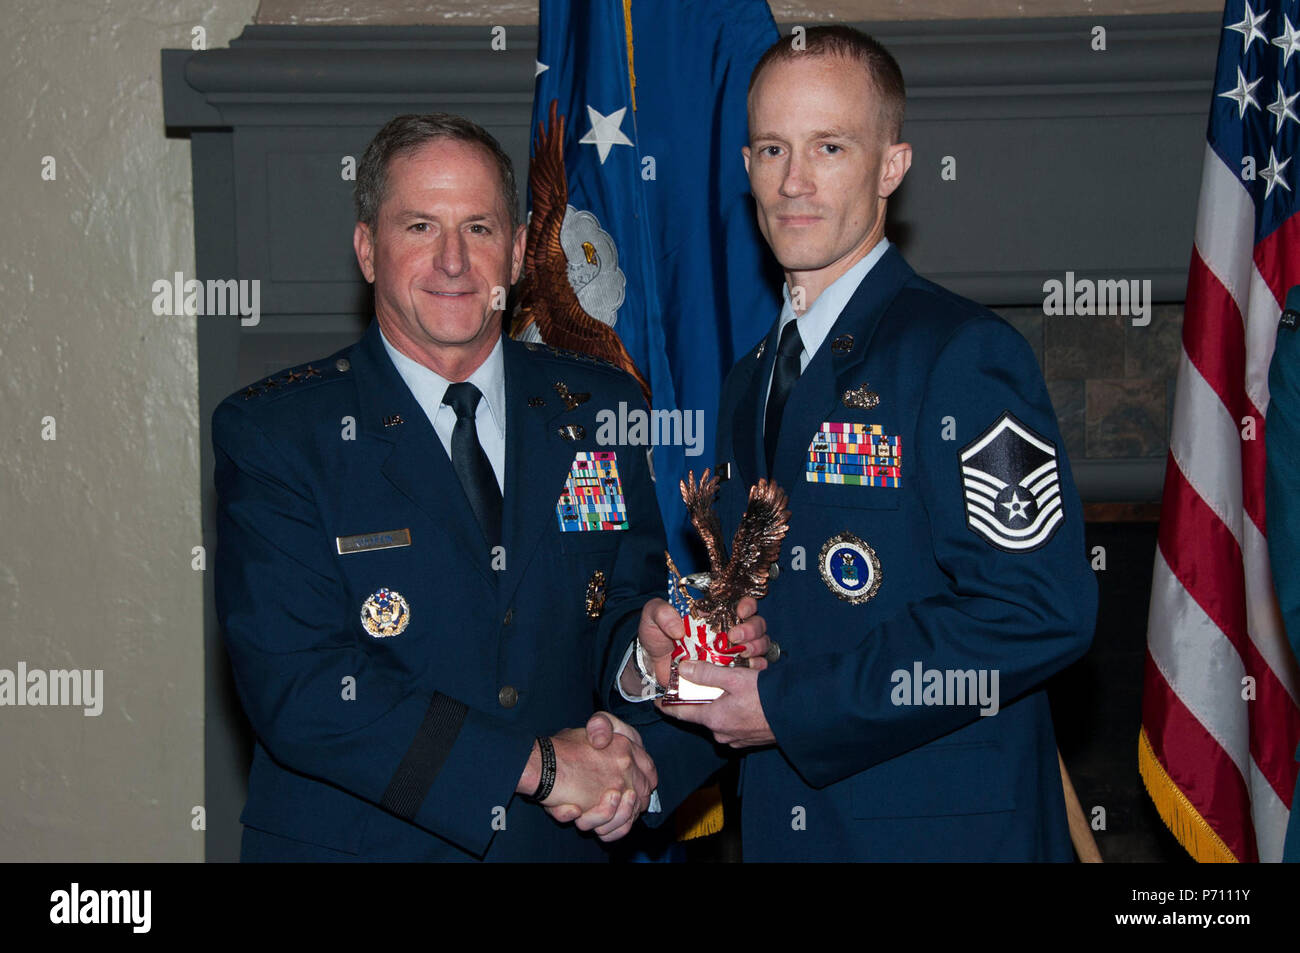 Maxwell AFB, Ala. - US Air Force Chief of Staff General David L. Goldfein presents the 2017 Secretary of the Air Force Leadership Award to Master Sergeant Christopher J. Kisse on May 10, 2017.  Kisse was the SECAF award winner from the Air Force Senior Non-Commissioned Officer Academy. (US Air Force Stock Photo